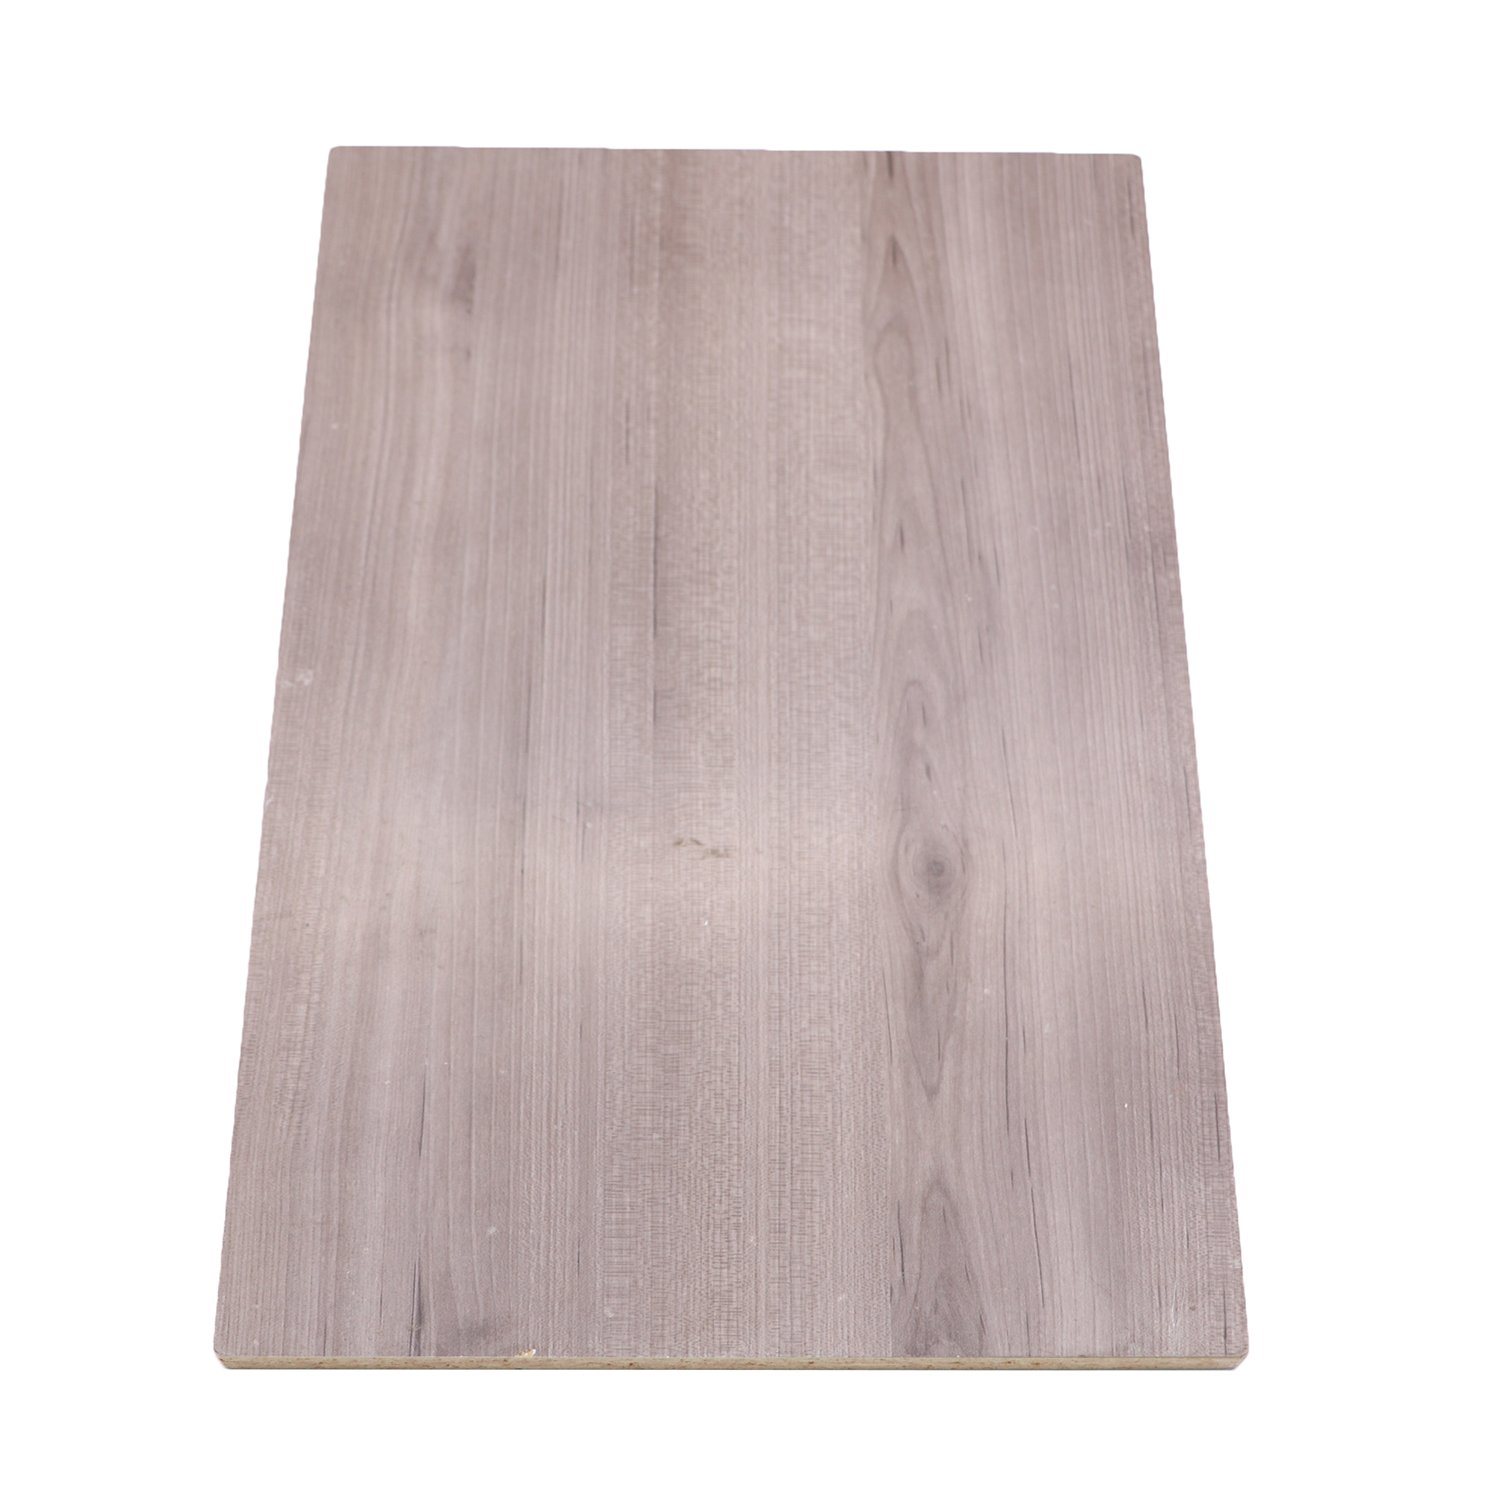 Rough Surface Melamine Laminated Chipboard for Cabinet Decoration